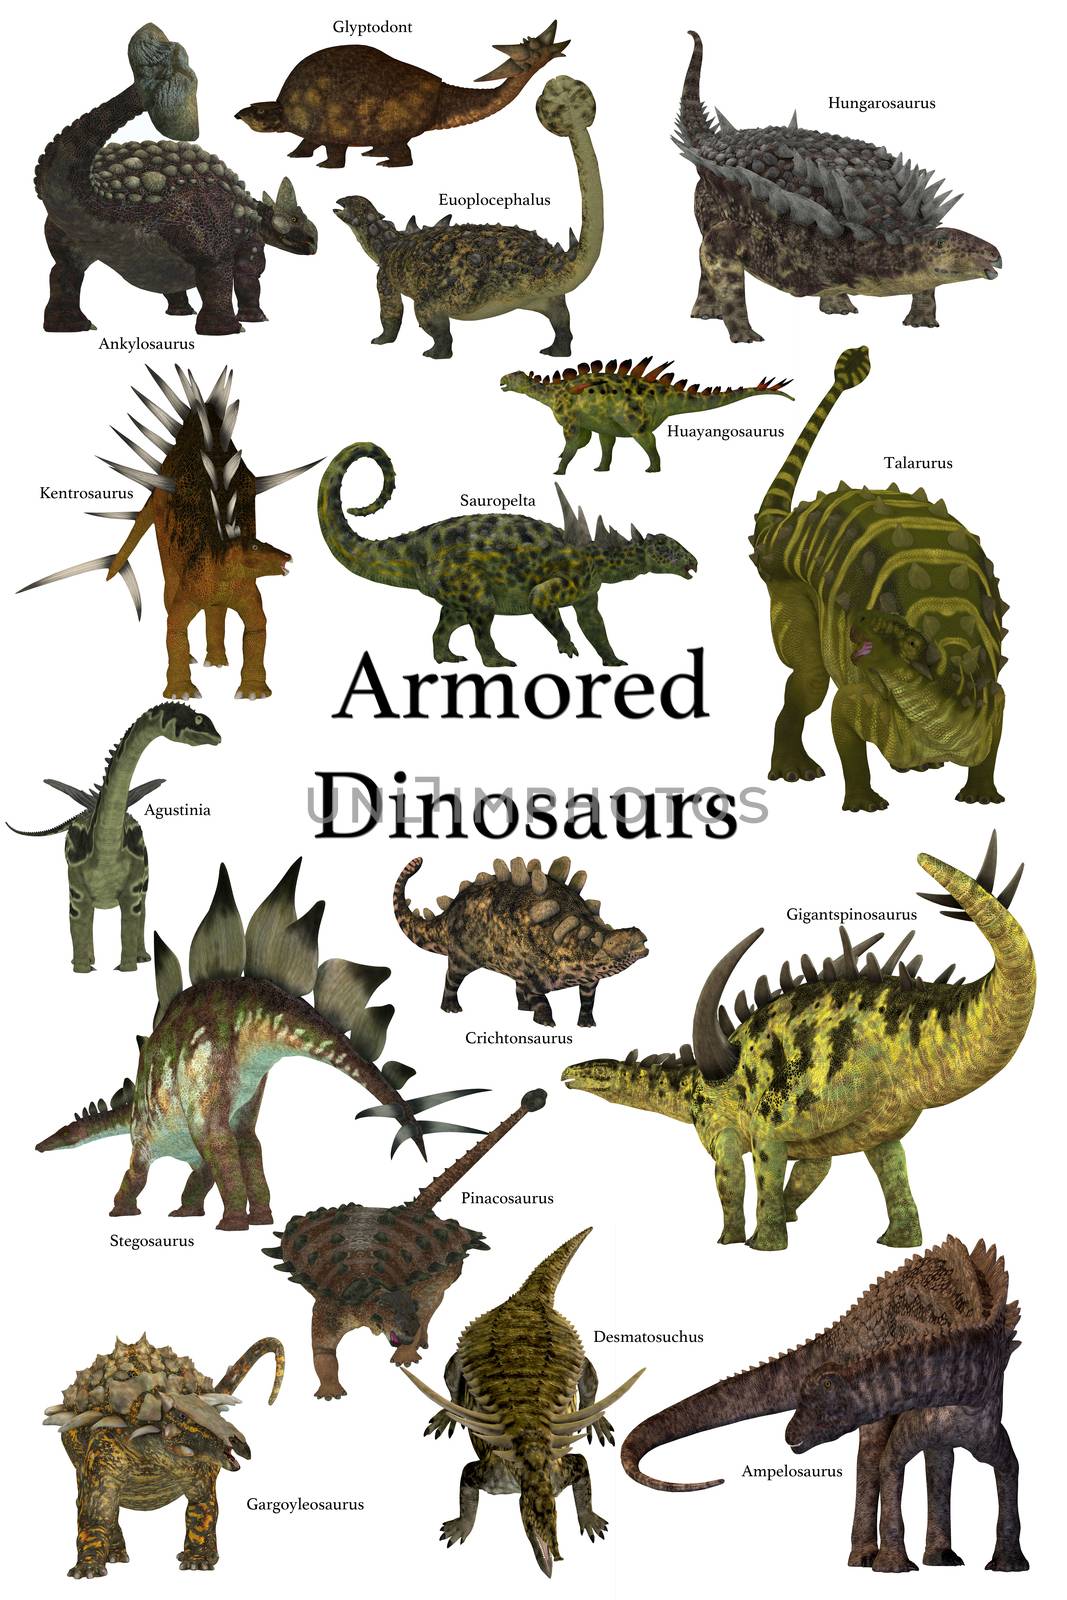 A collection of various armored dinosaurs from different prehistoric periods of Earth's history.